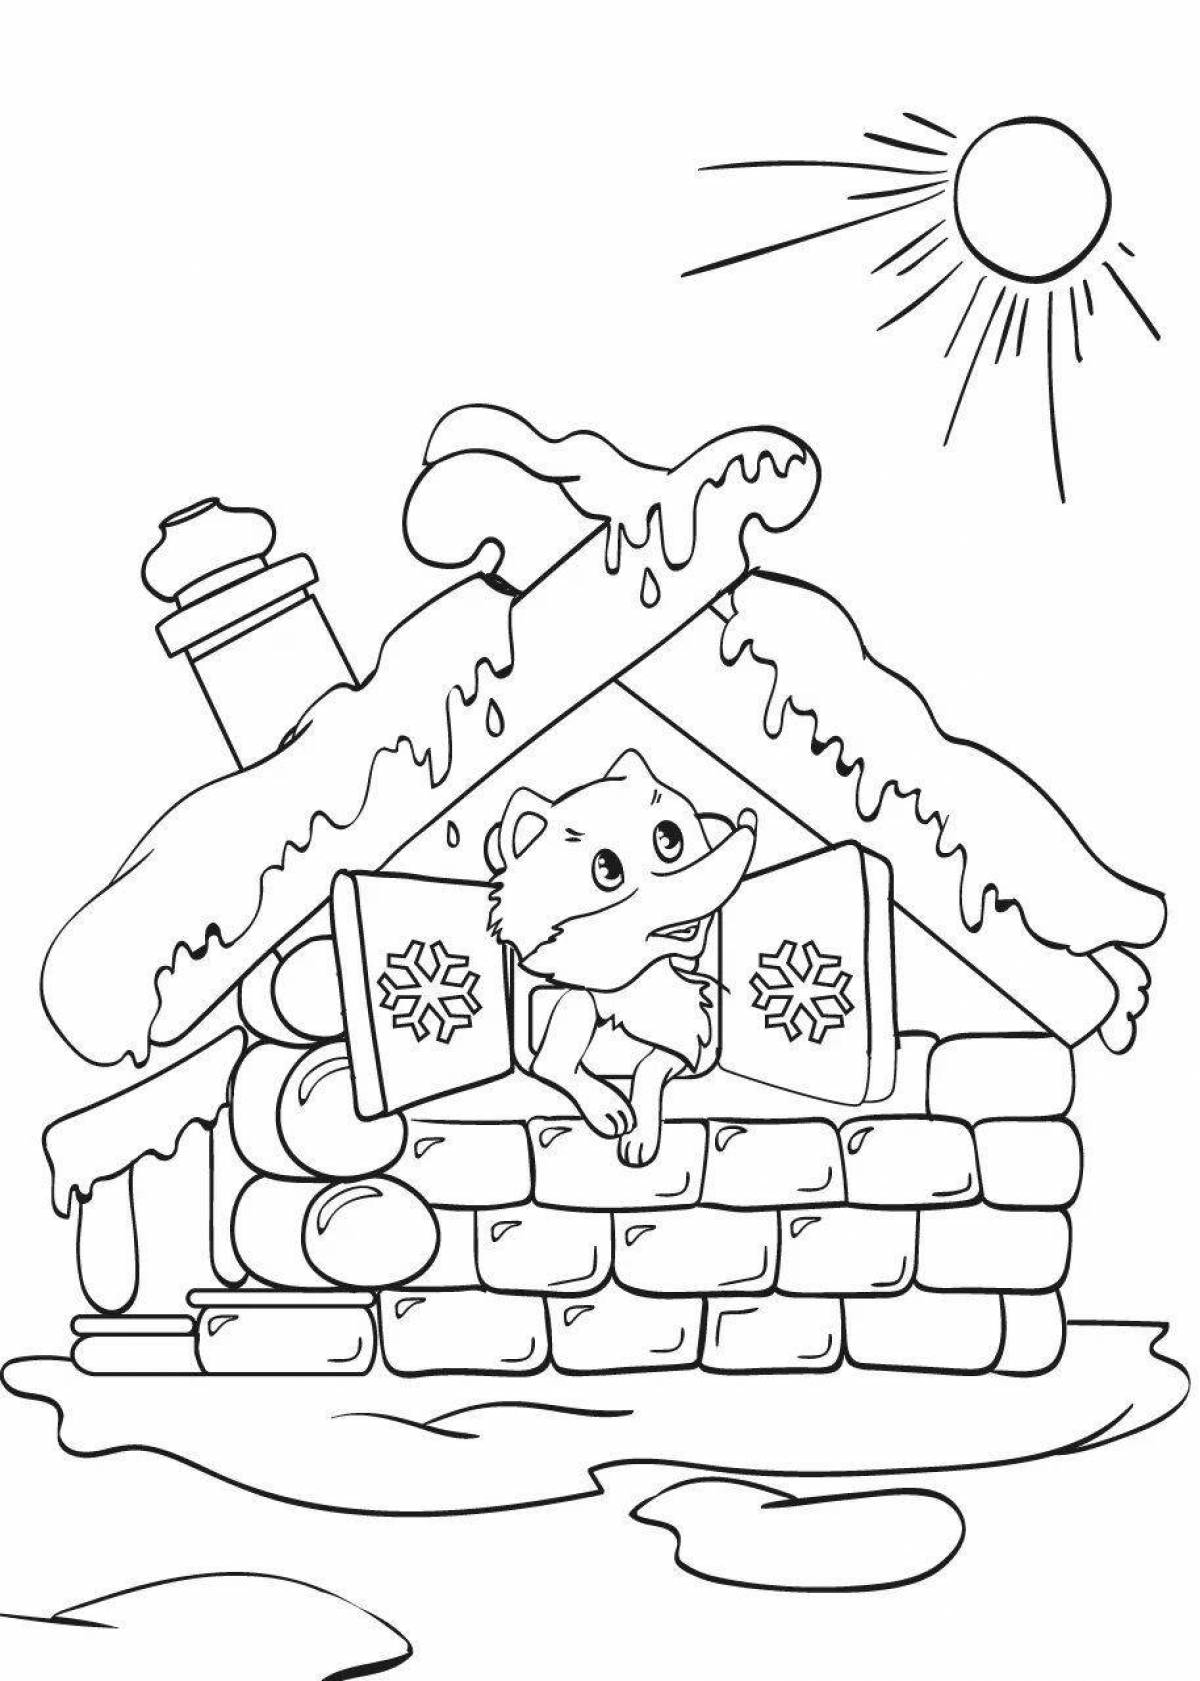 Majestic ice hut coloring page